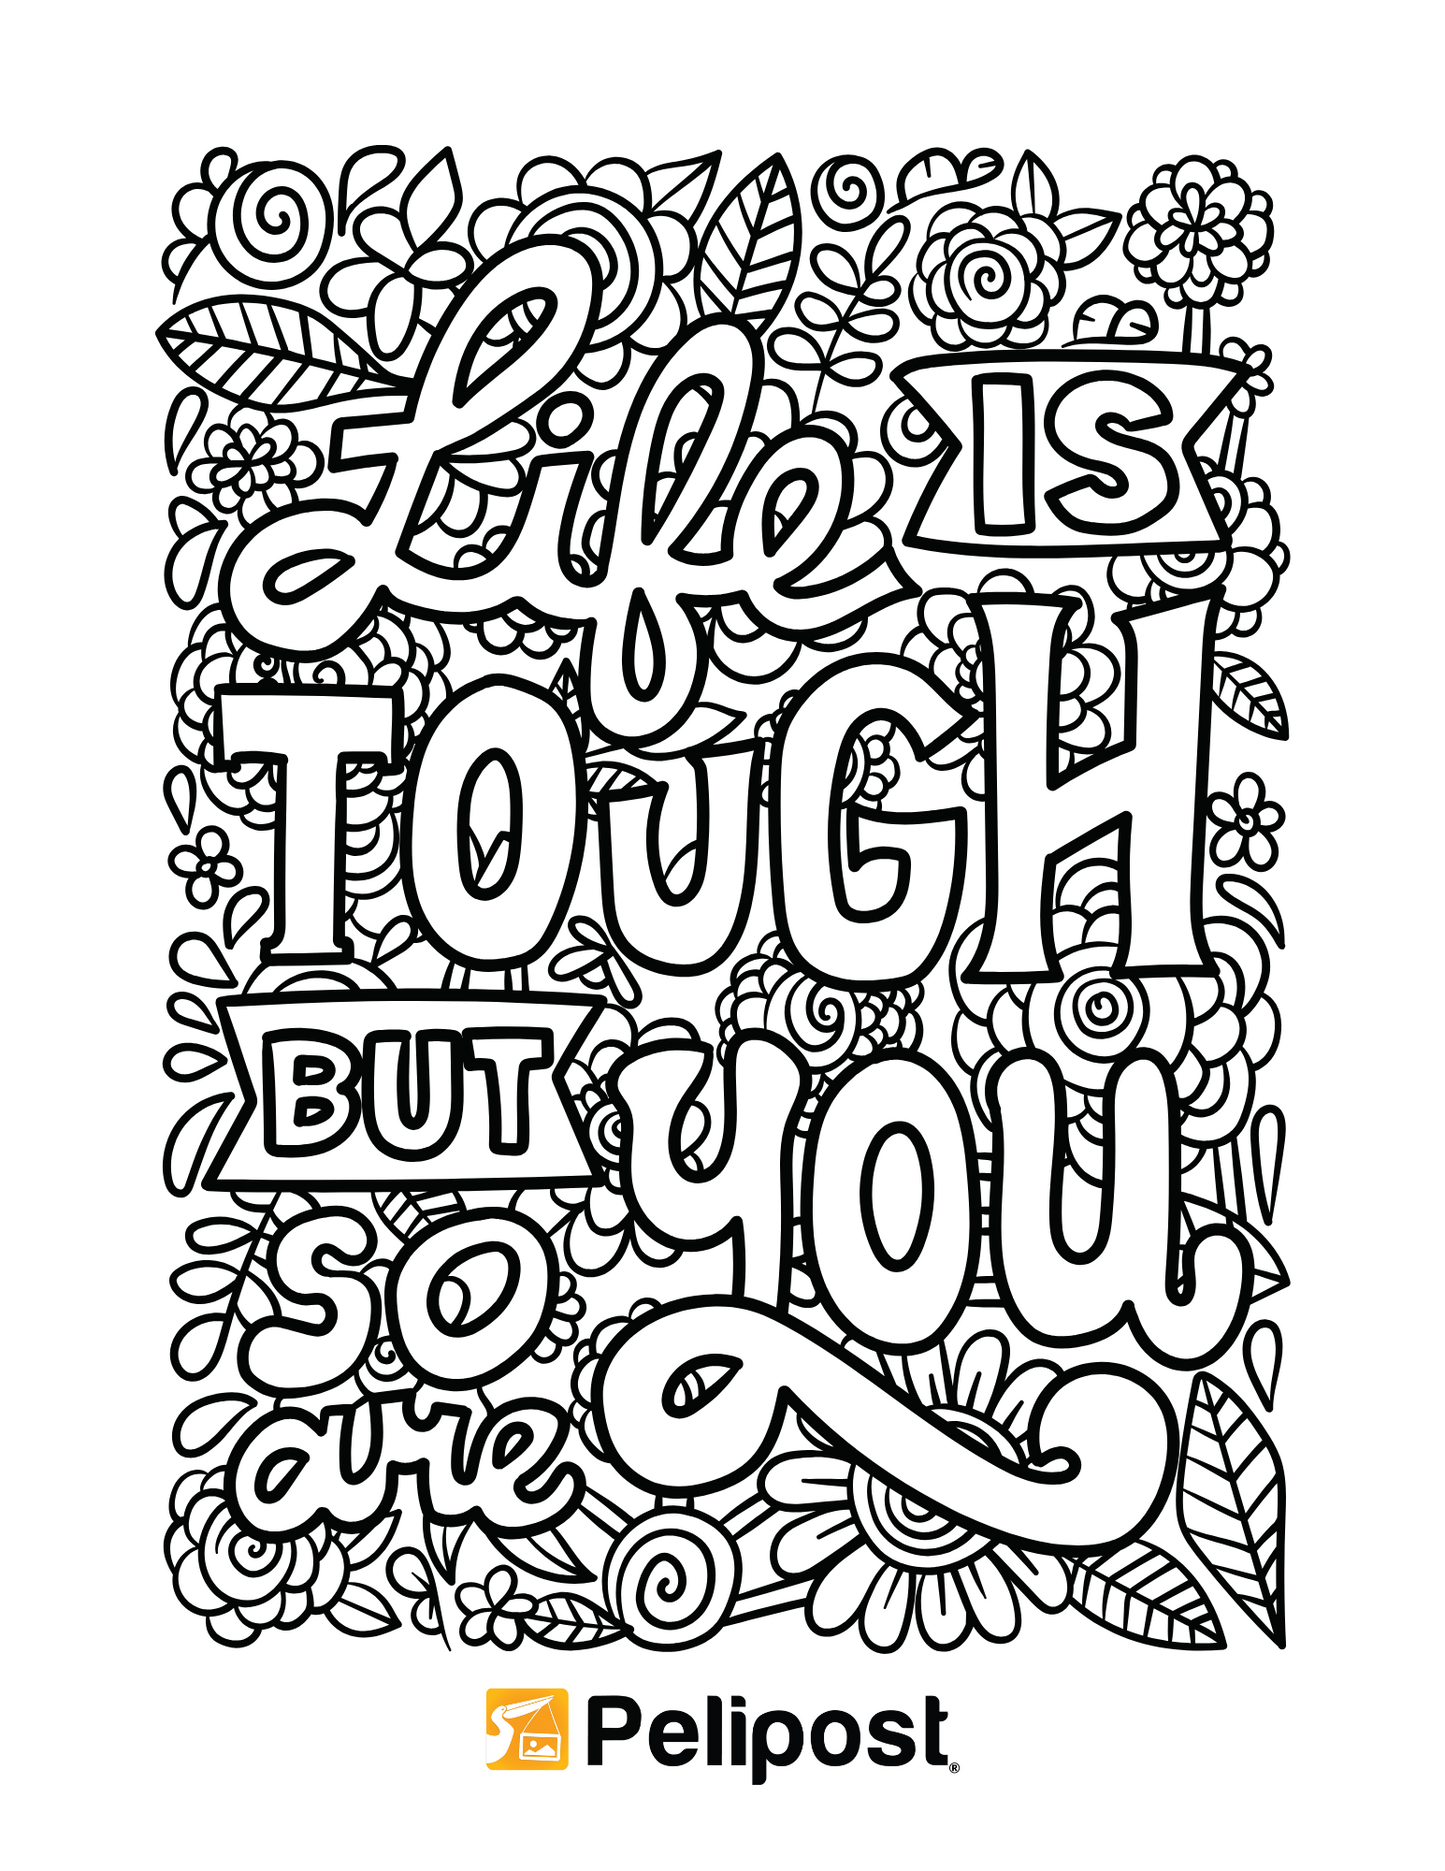 Life is Tough But So Are You Coloring Page | FREE Digital Download